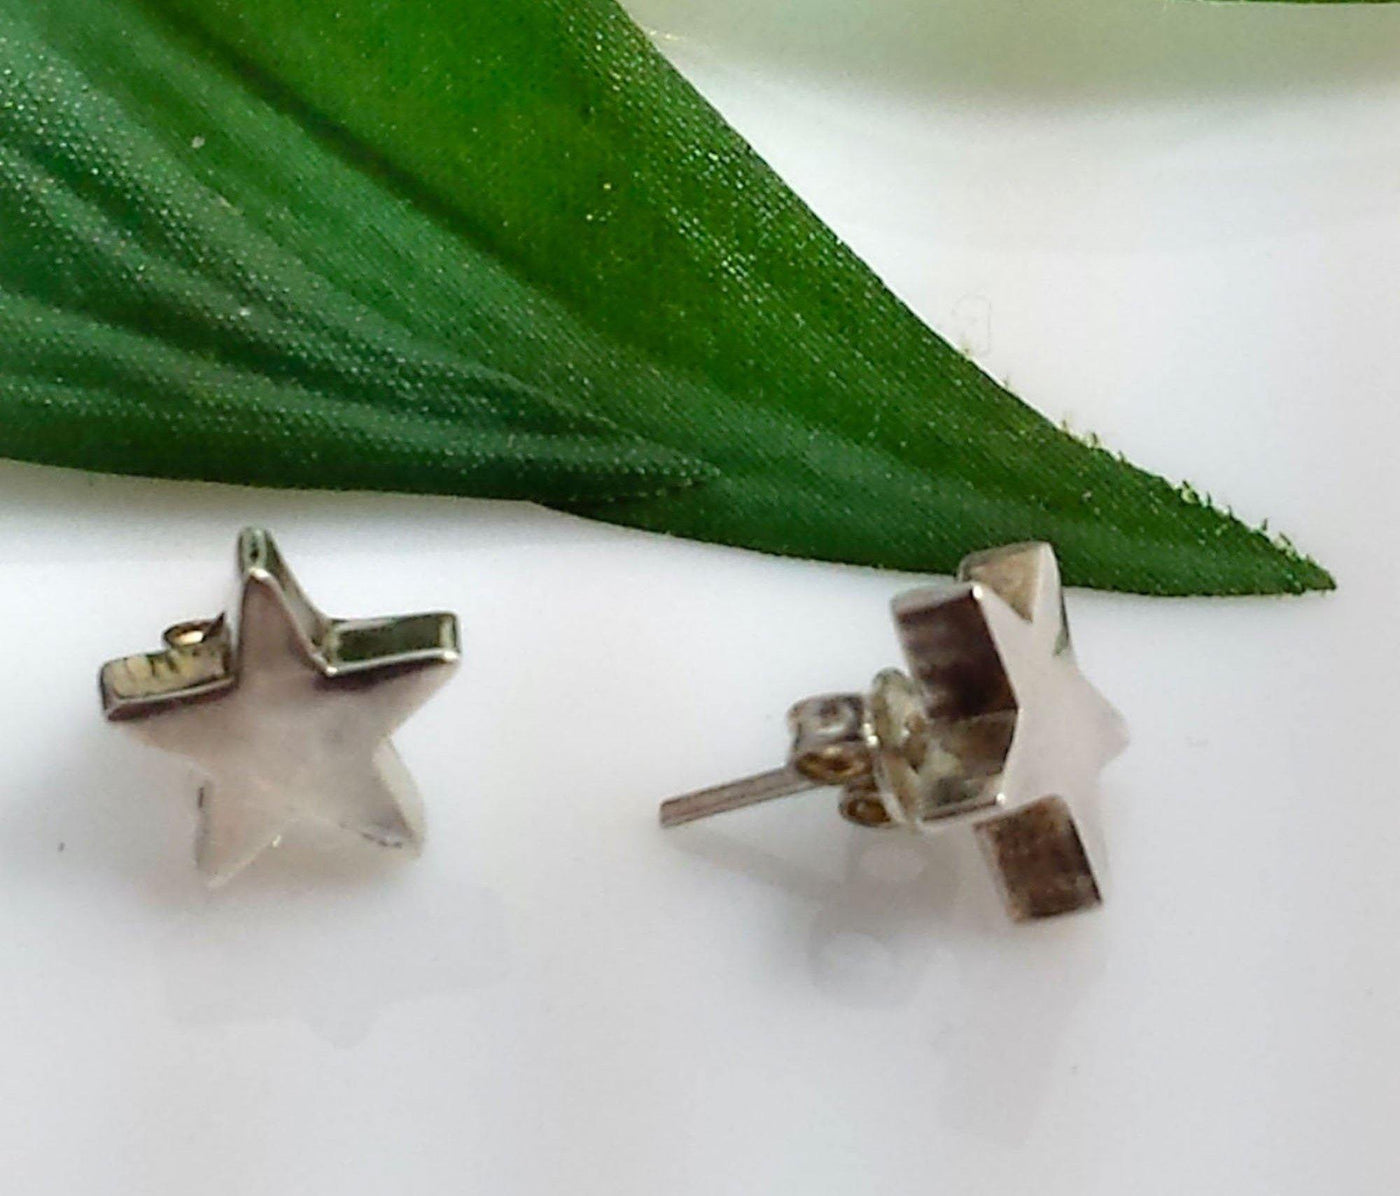 Silver star earrings for the minimalist - LB Designs